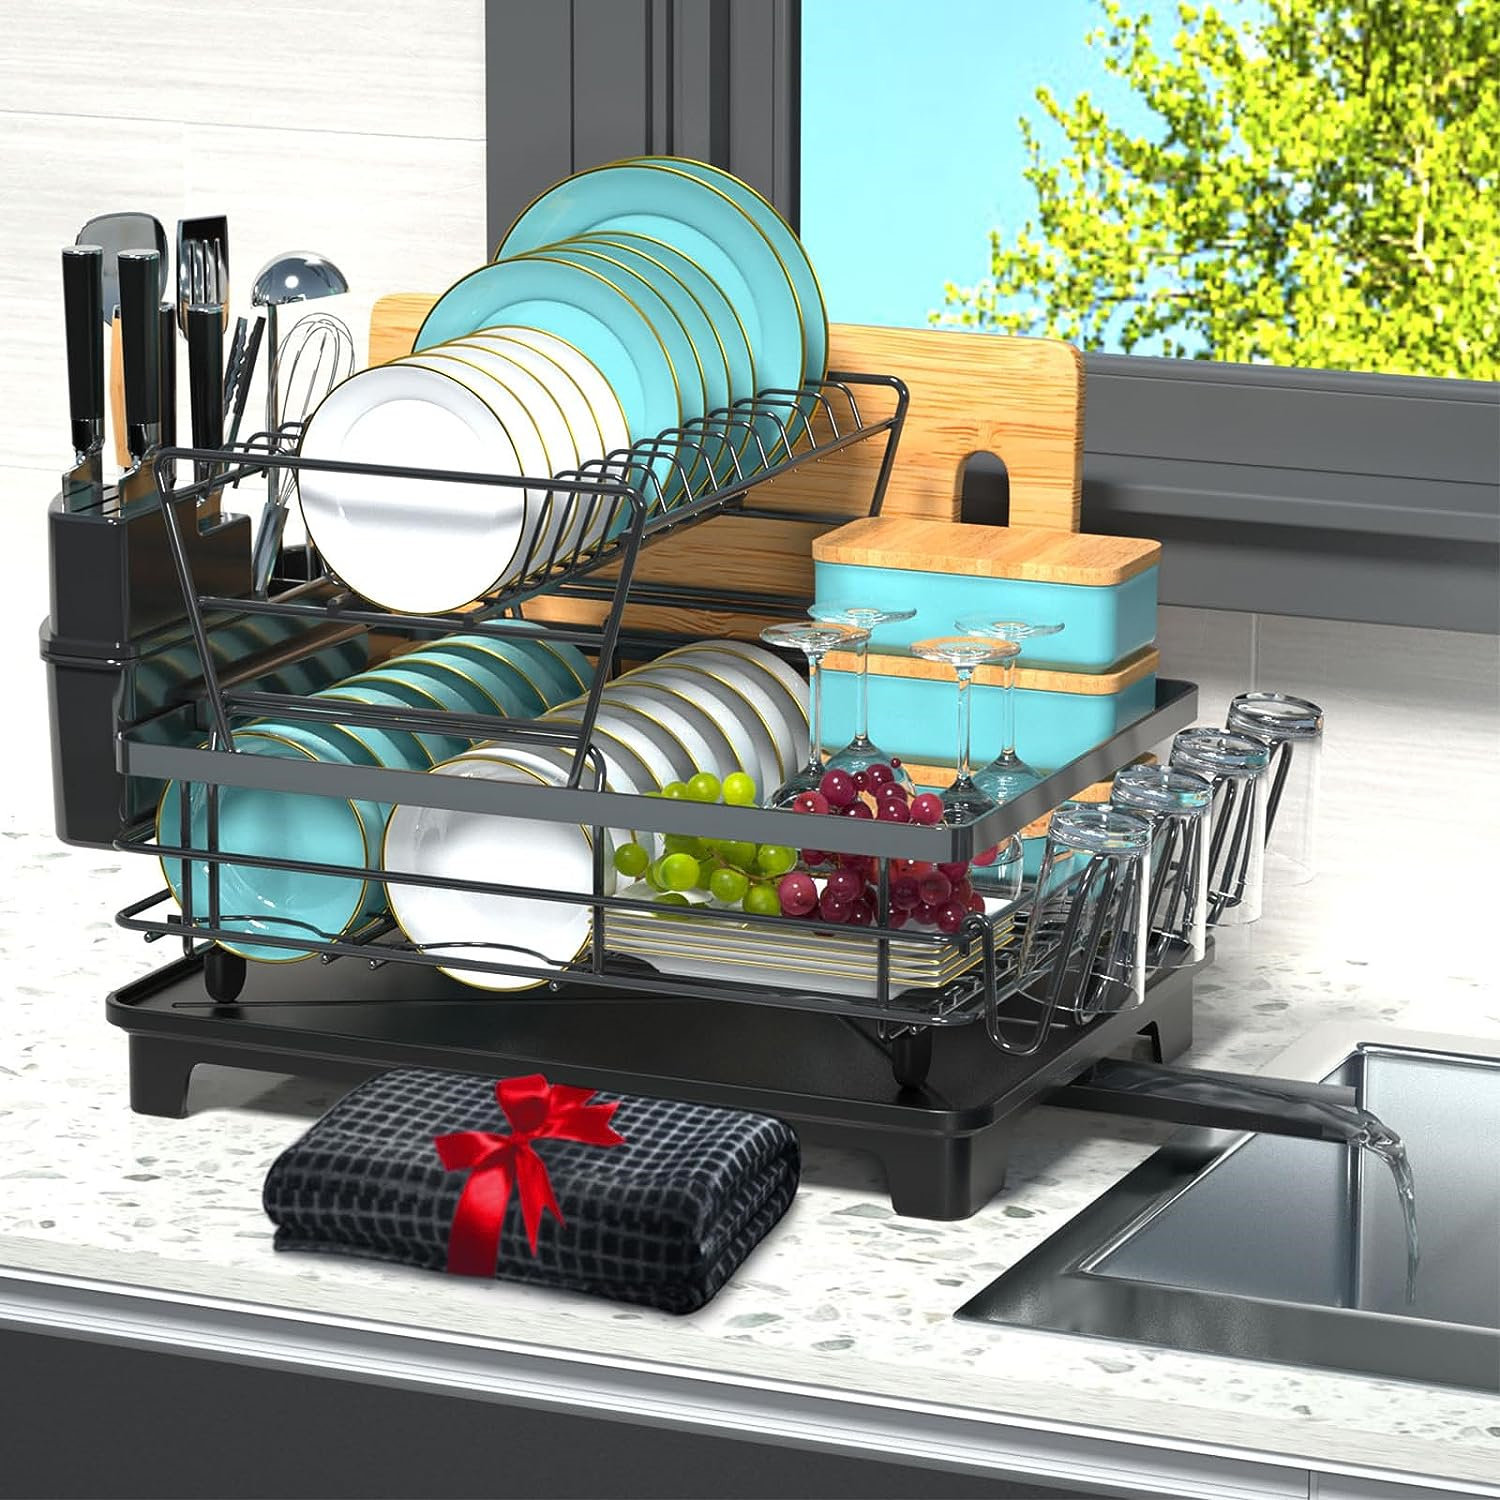 ColorLife Stainless Steel Dish Rack